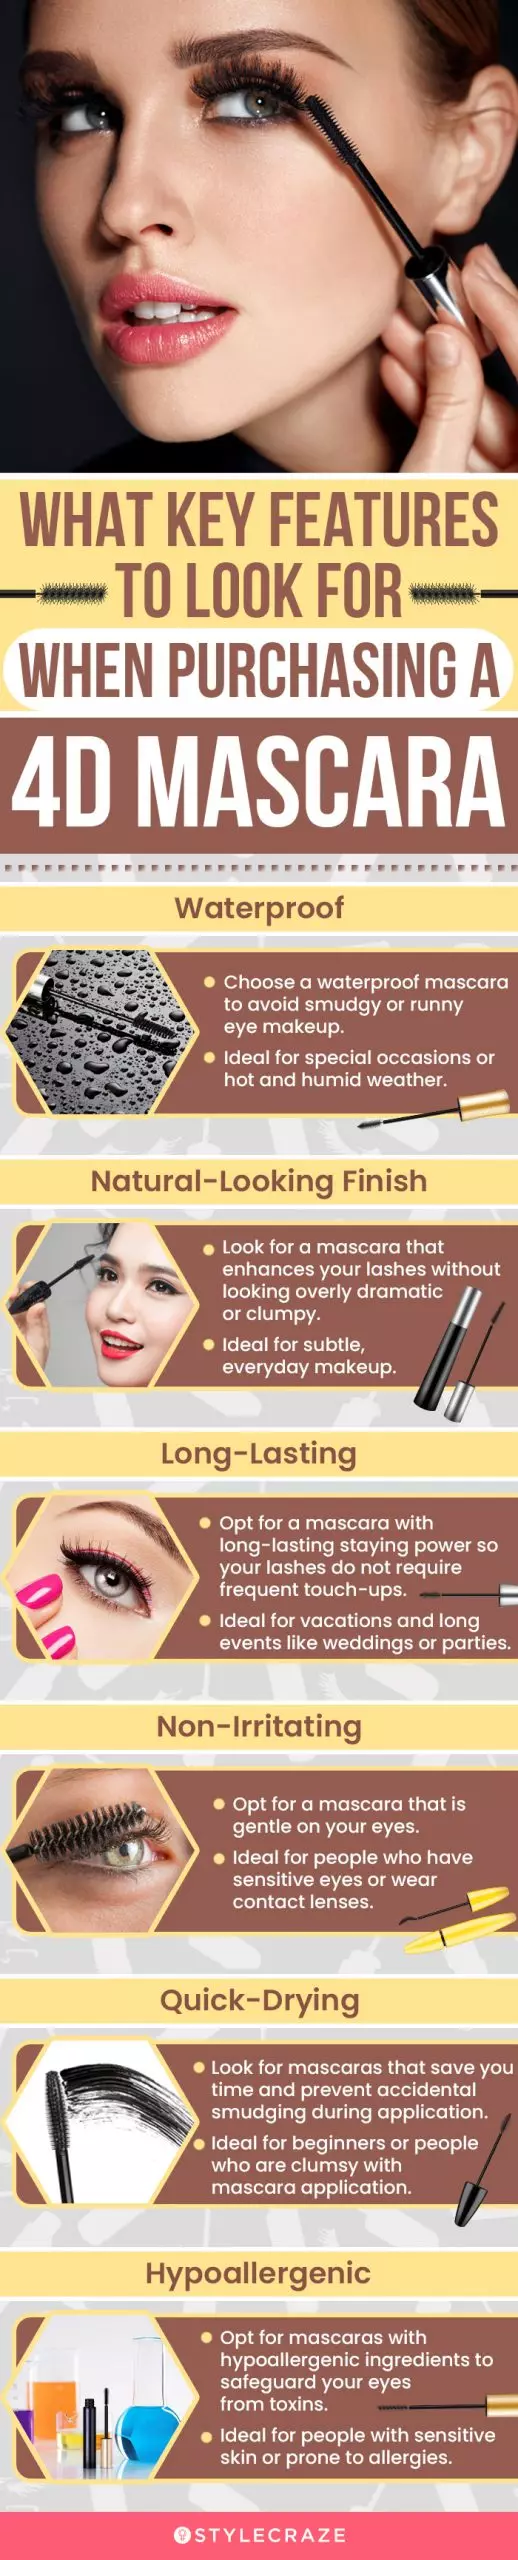 What Key Features To Look For When Purchasing A 4D Mascara (infographic)